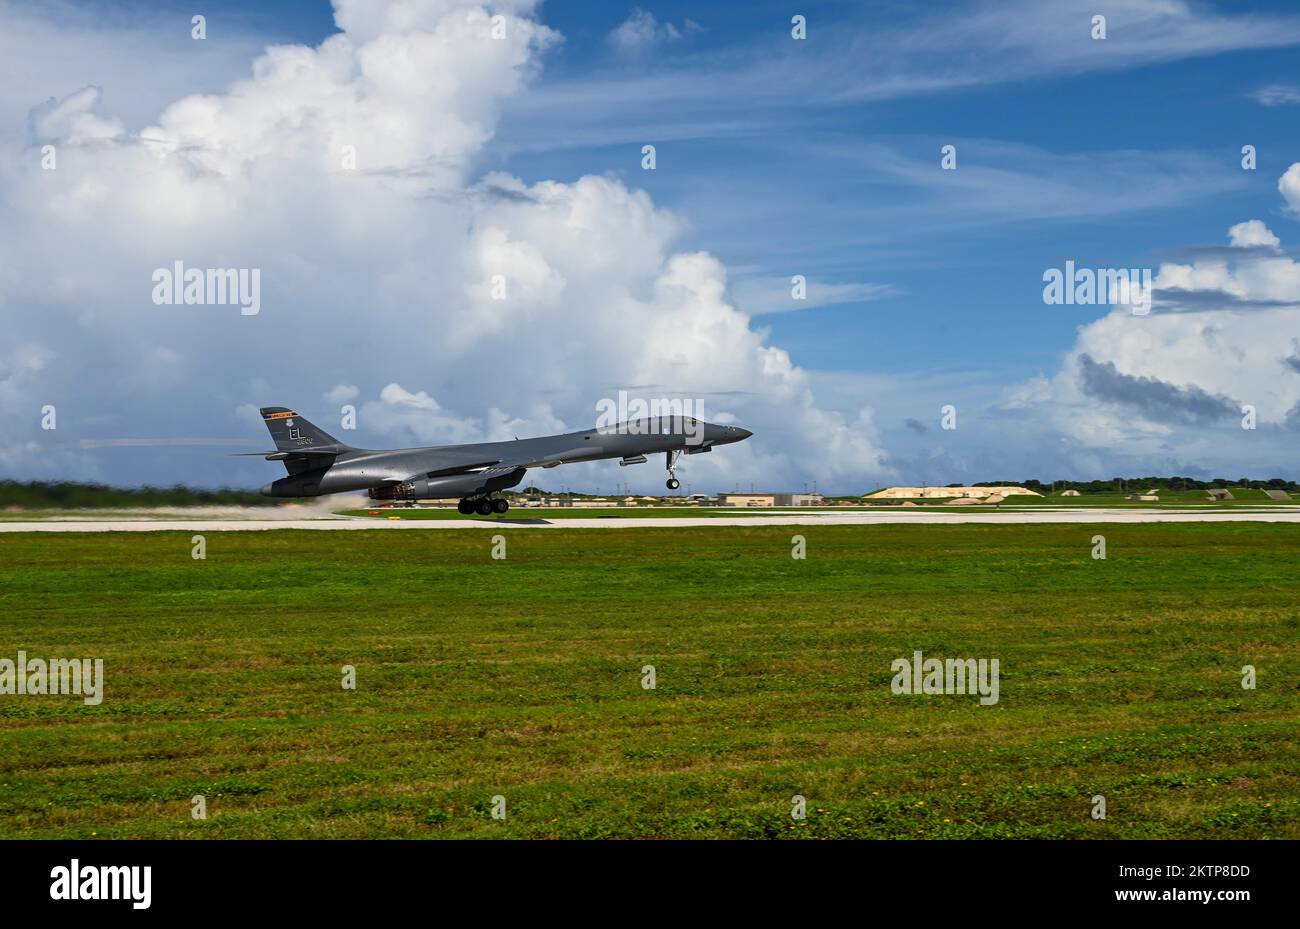 A U.S. Air Force B-1B Lancer assigned to the 37th Expeditionary Bomb Squadron, Ellsworth Air Force Base, South Dakota, takes off in support of a Bomber Task Force mission at Andersen AFB, Guam, Nov. 12, 2022. BTF missions are designed to showcase Pacific Air Force’s ability to deter, deny and dominate any influence or aggression from adversaries or competitors. (U.S. Air Force photo by Airman 1st Class Allison Martin) Stock Photo